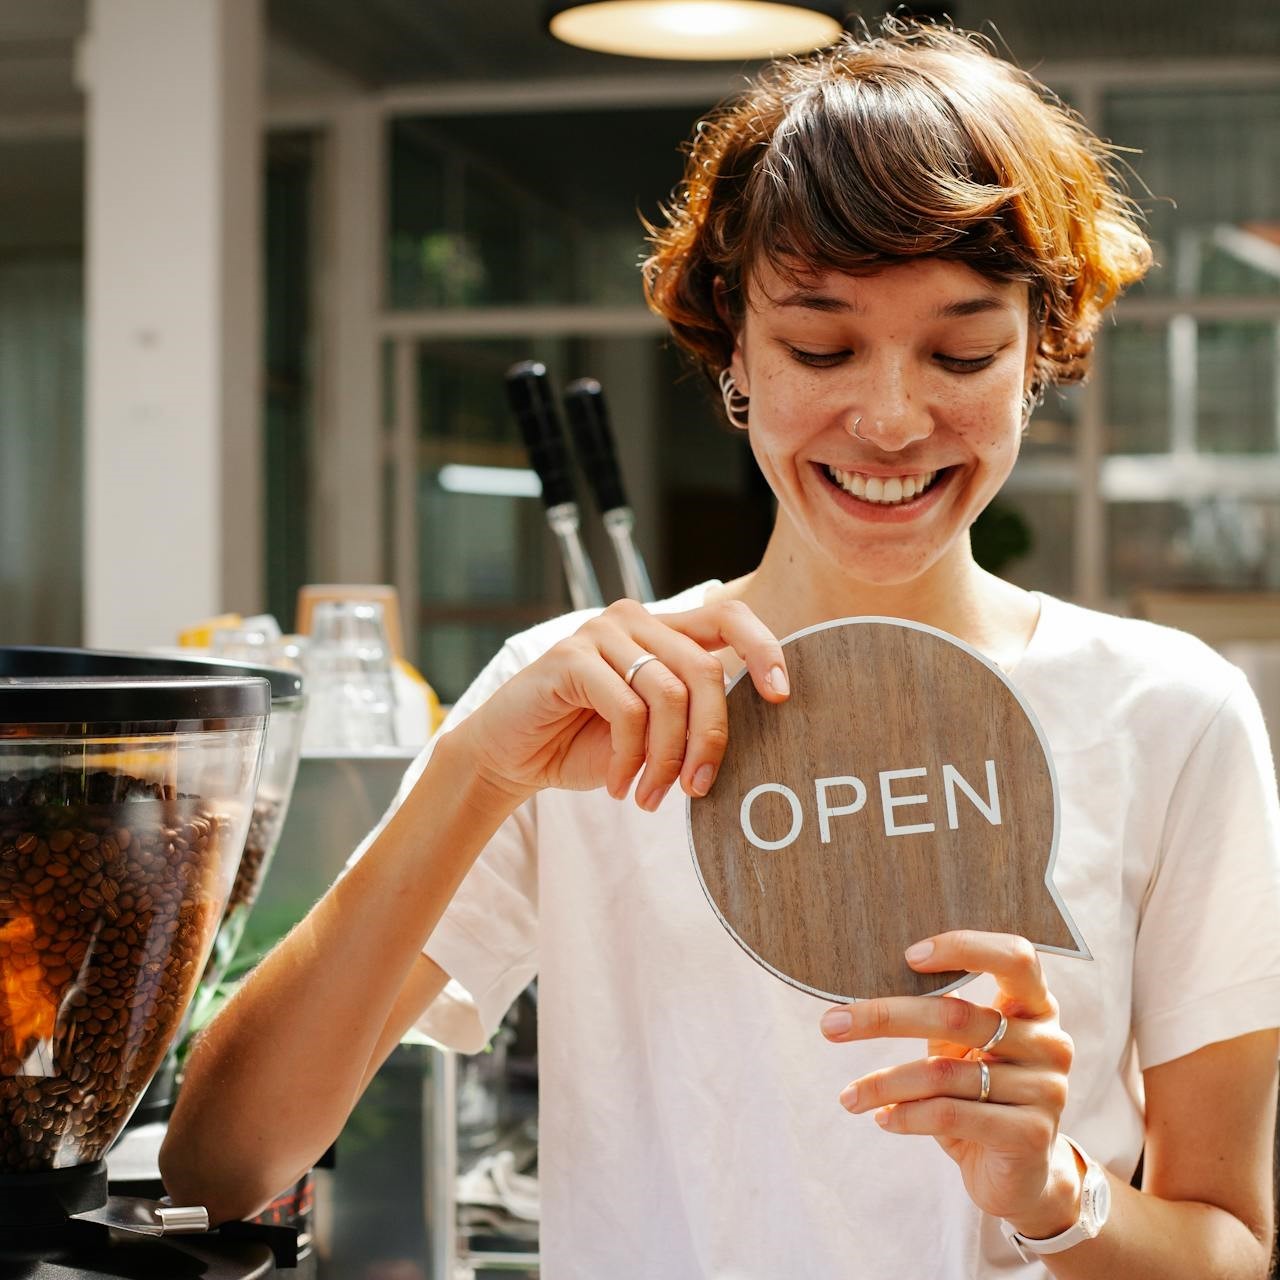 Woman standing in cafe with open sign